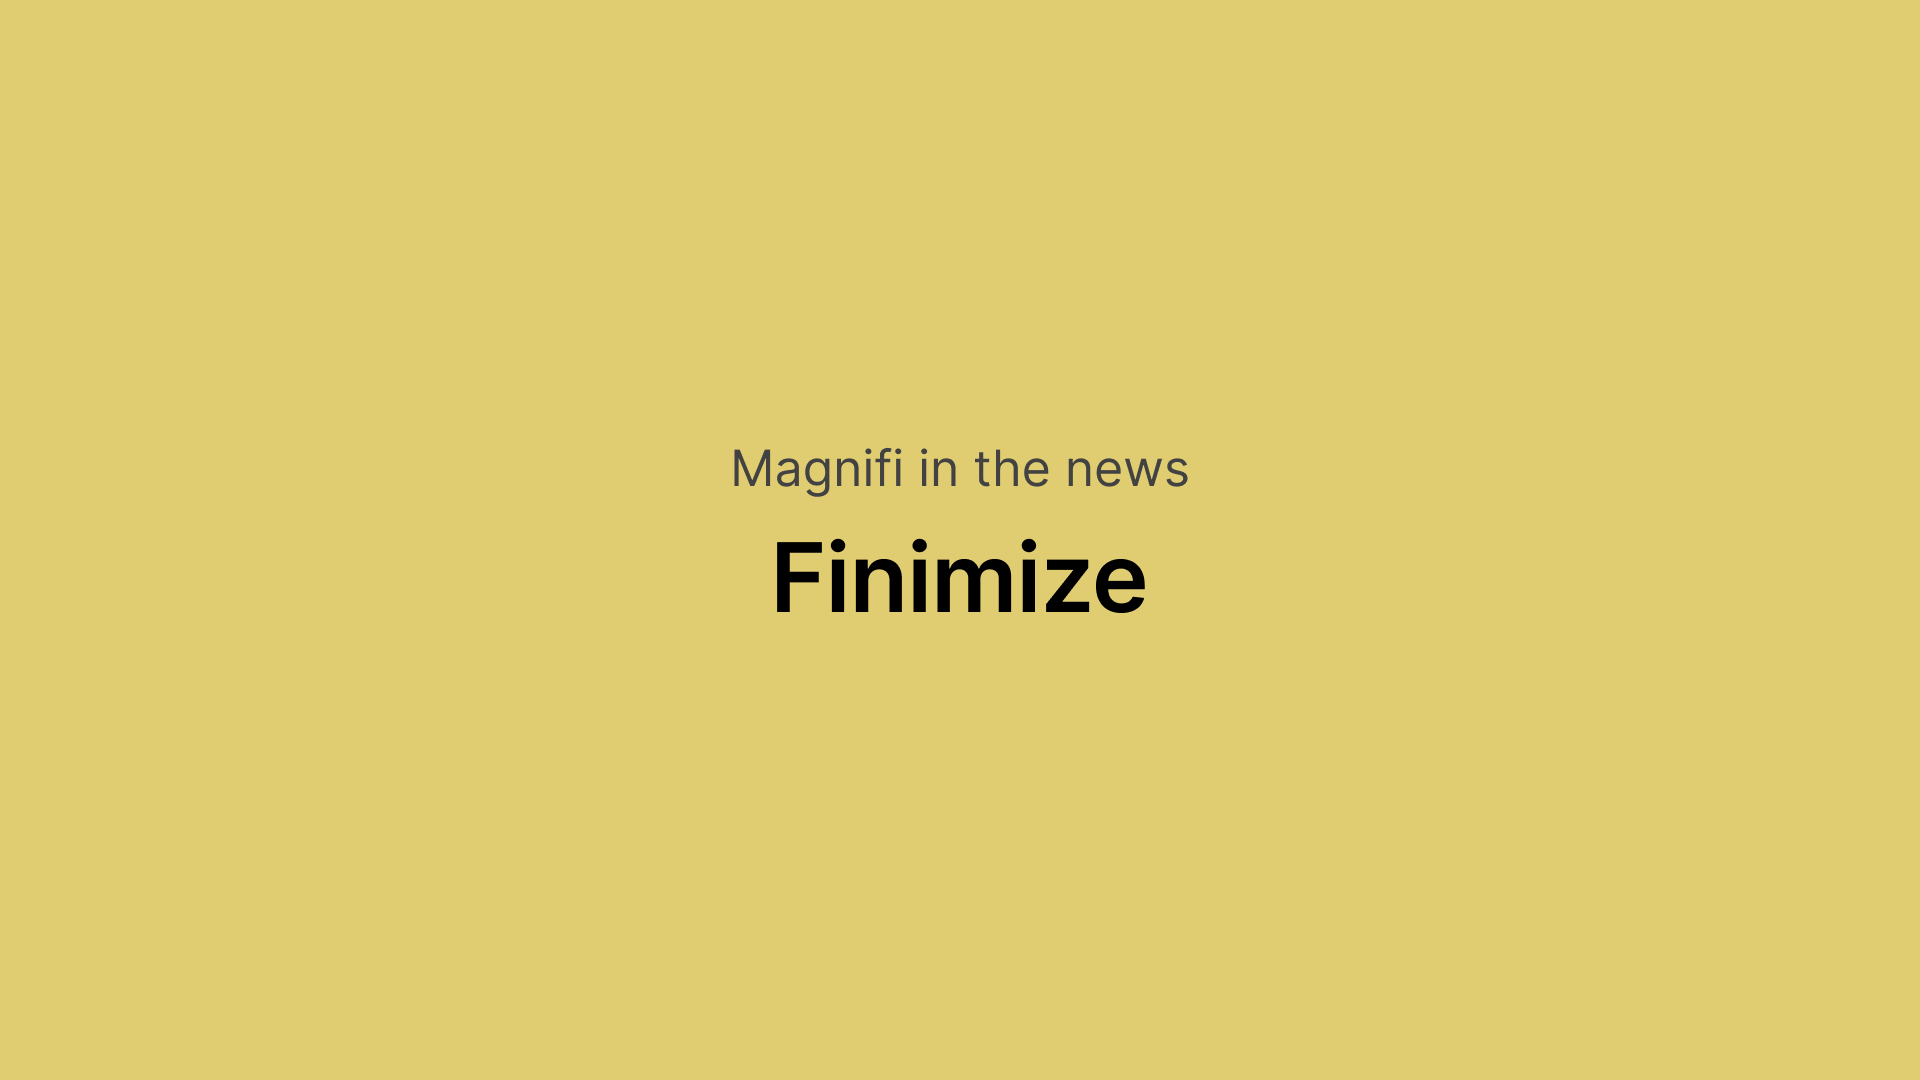 Magnifi in the news
Finimize